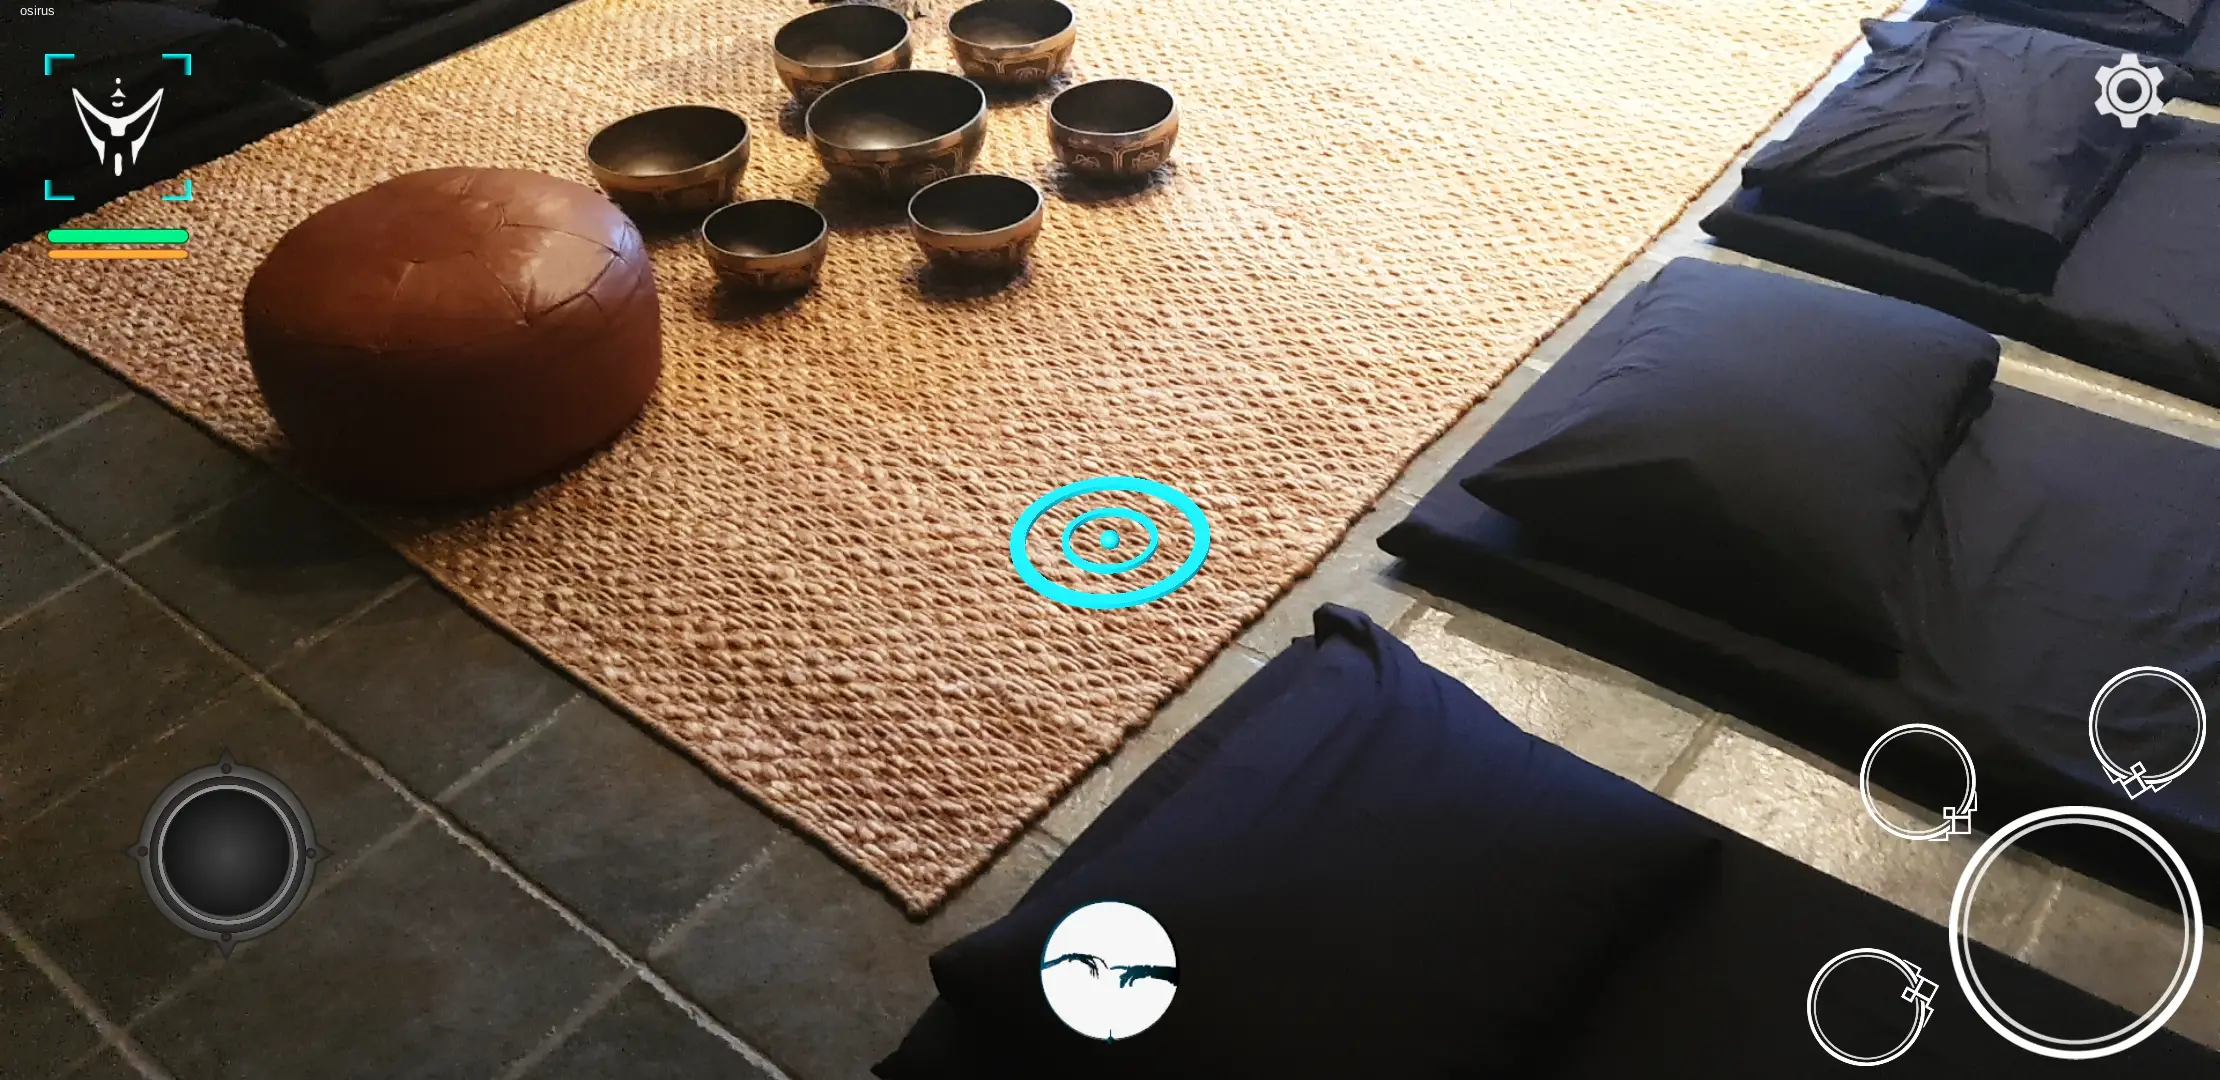 How to Play AR TCG. Using mobile augmented reality to scan a living room environment